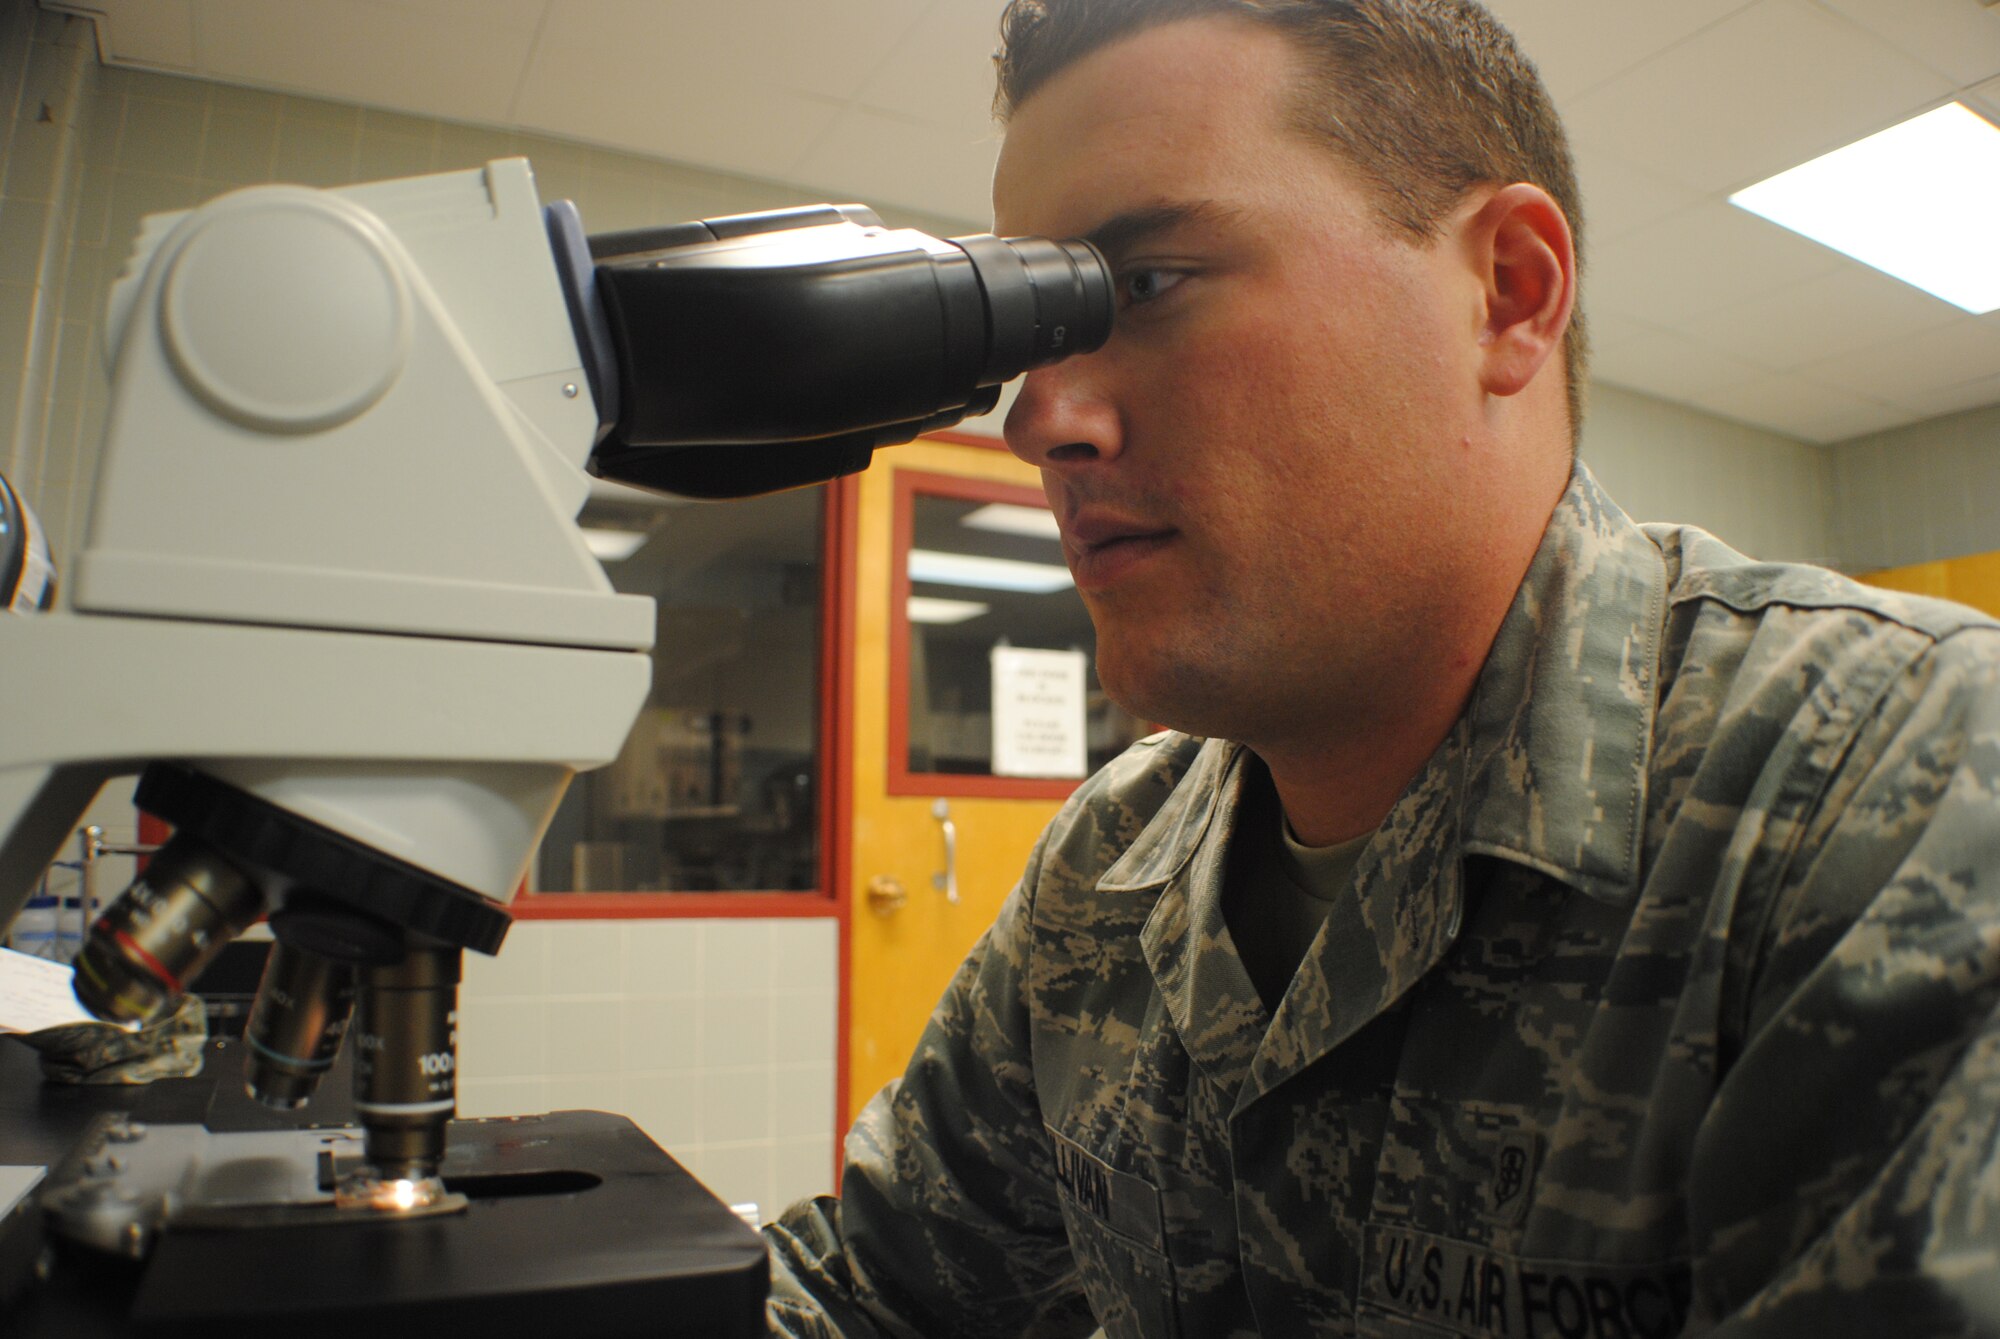 Staff Sgt. Thomas C. Sullivan Jr., 319th Medical Support Squadron laboratory technician, adjusts the focus on microscope May 22, 2013, at the medical laboratory on Grand Forks Air Force Base, N.D. The base medical laboratory services are accredited by the College of American Pathologists. (U.S. Air Force photo/Staff Sgt. Luis Loza Gutierrez)